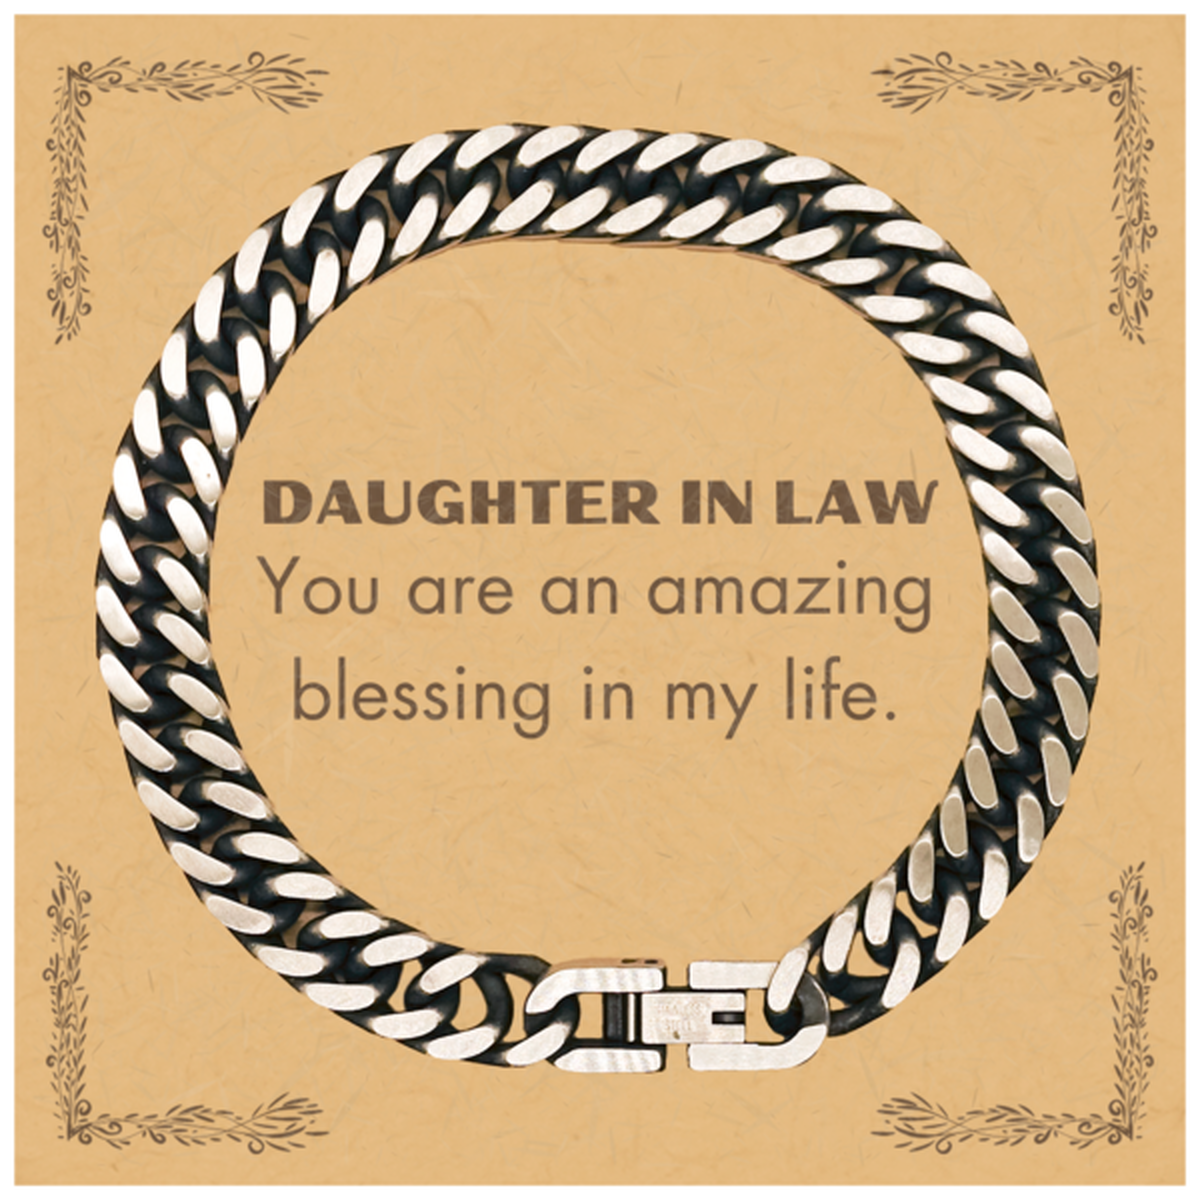 Daughter In Law Cuban Link Chain Bracelet, You are an amazing blessing in my life, Thank You Gifts For Daughter In Law, Inspirational Birthday Christmas Unique Gifts For Daughter In Law